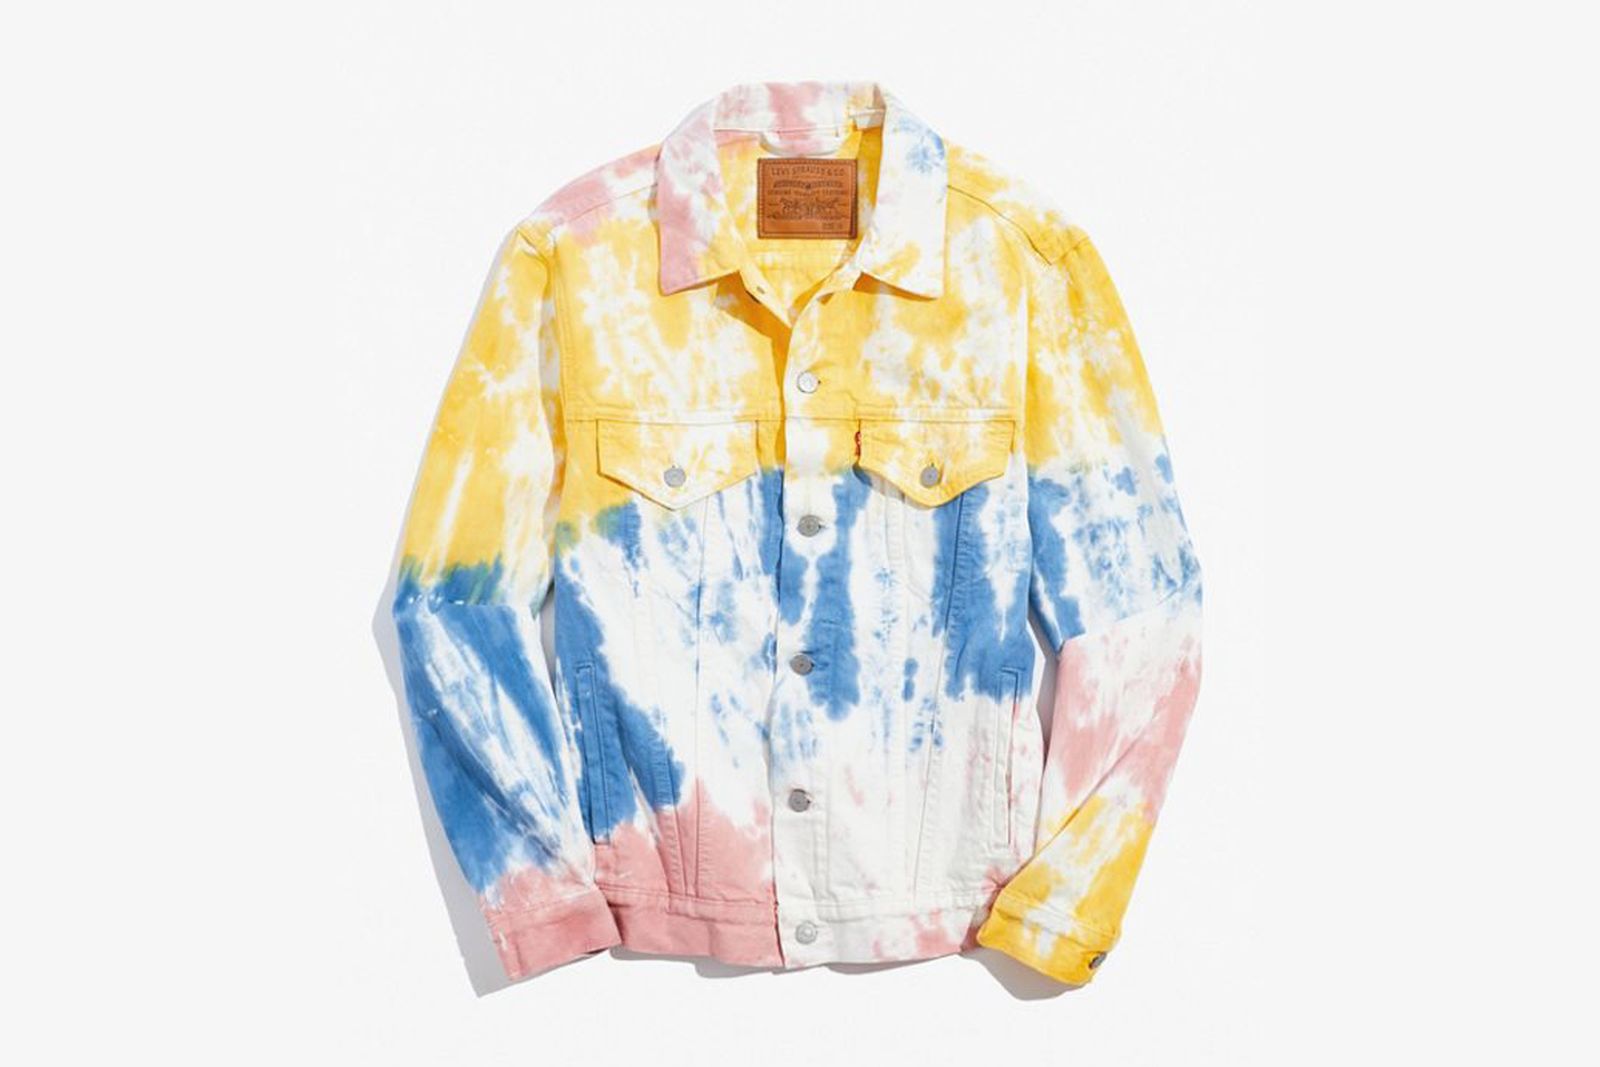 Levi’s Tie-Dye Denim Jacket in Yellow, Blue, and Pink